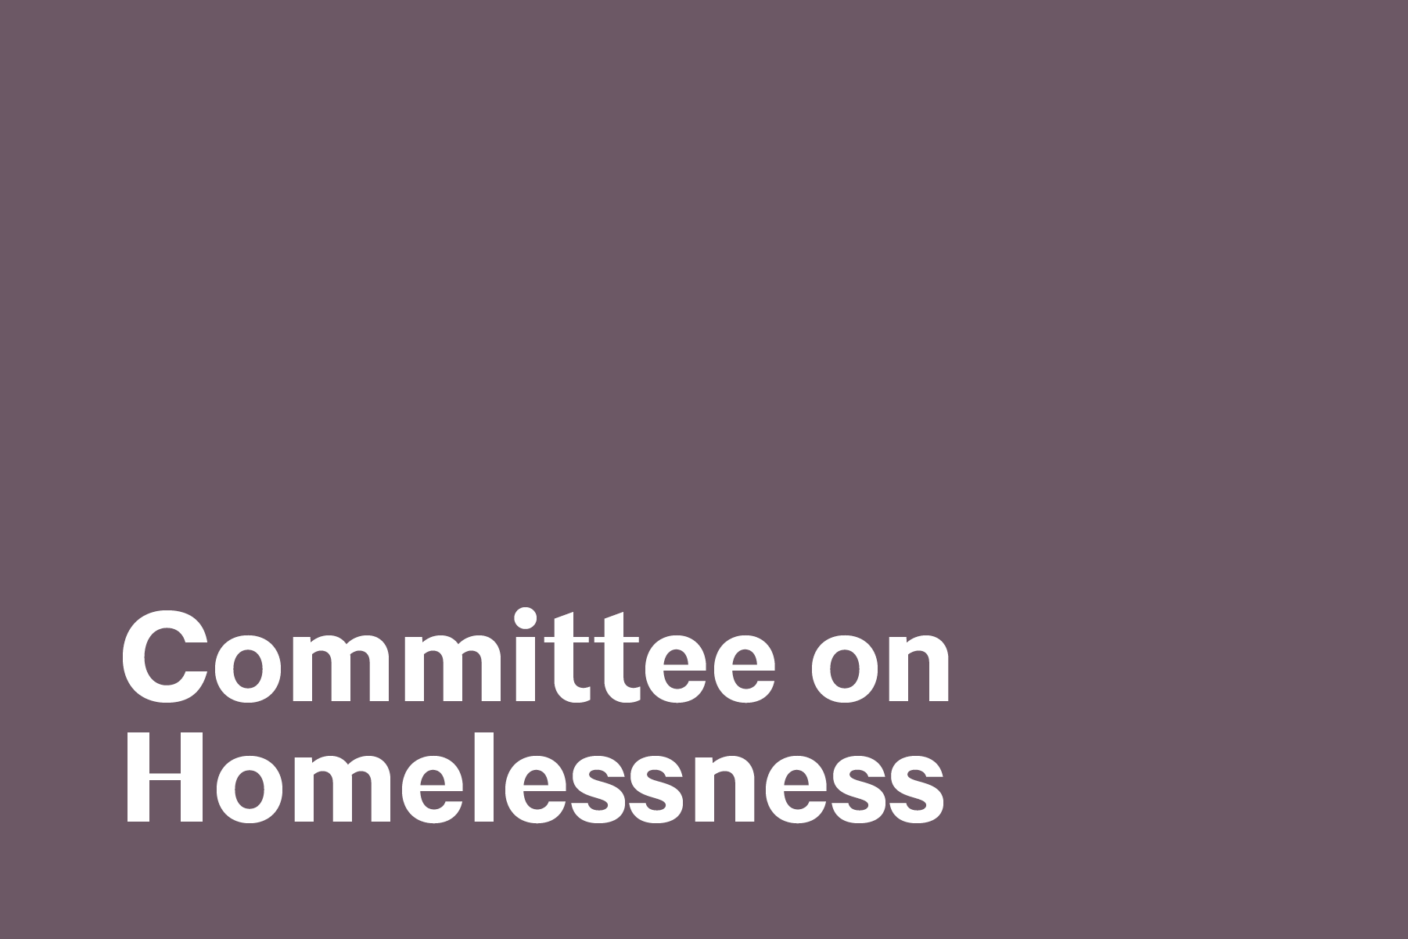 The Committee on Homelessness (COHO) mobilizes architects to help our unsheltered neighbors through the areas of advocacy, education, and service. We are architects, professionals, and concerned citizens who believe that the Seattle region’s homelessness crisis demands immediate action. We aim to use our knowledge of design, construction, and the urban environment to help those who are unsheltered or lack housing security. [break][break]** For the foreseeable future, we are meeting through Zoom to prevent the spread of COVID-19. Please subscribe to our email list to receive the Zoom invitations for meetings. [break][break]